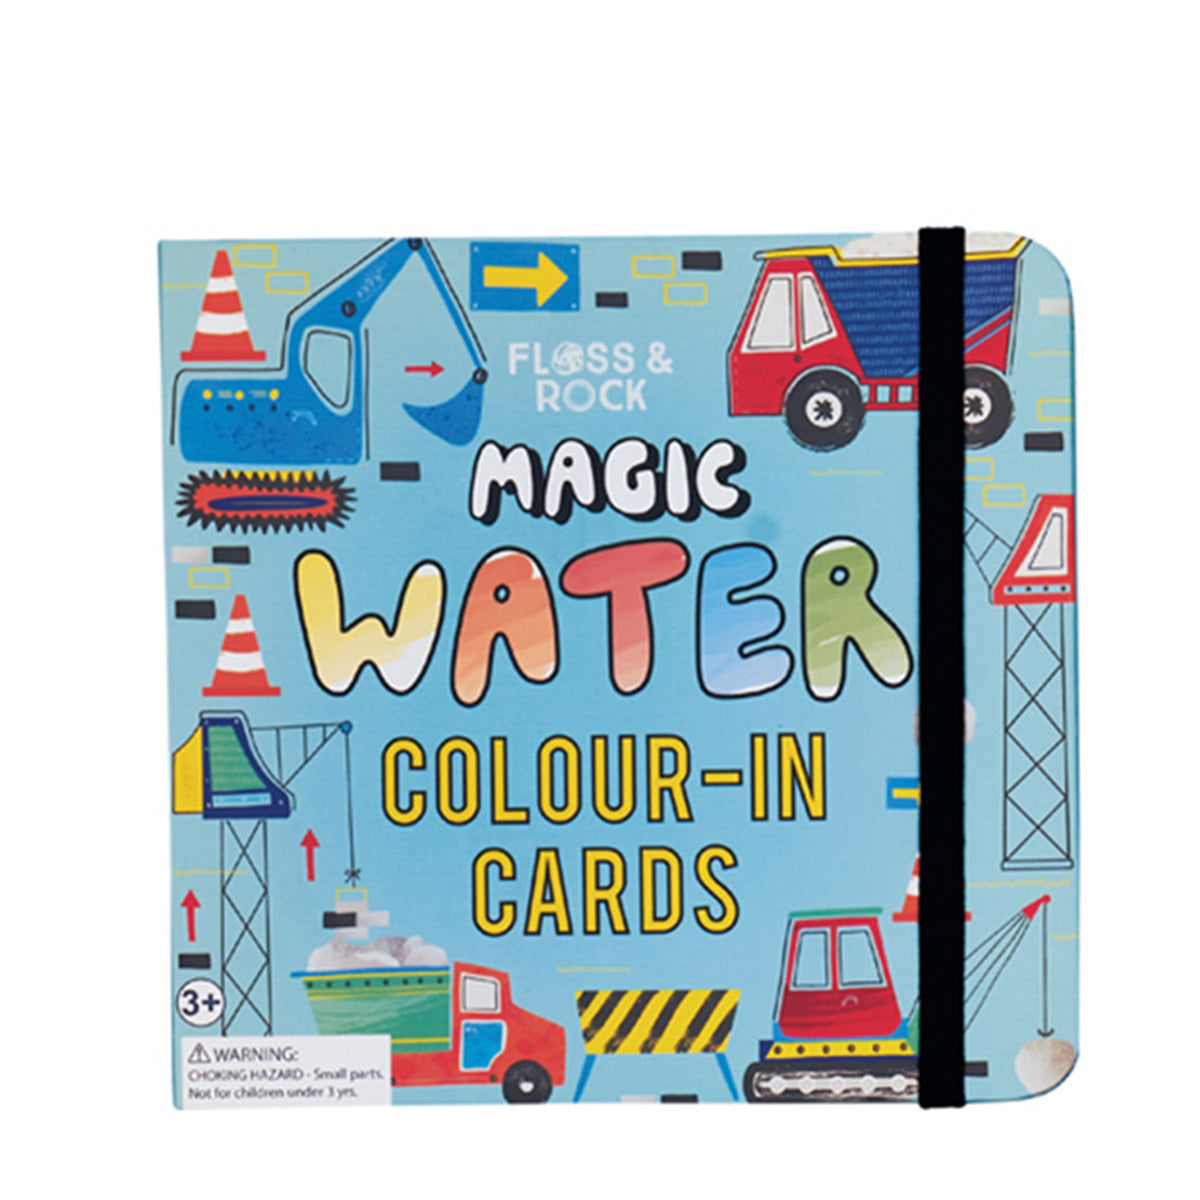 Magic Water Colour -In Cards - CONSTRUCTION